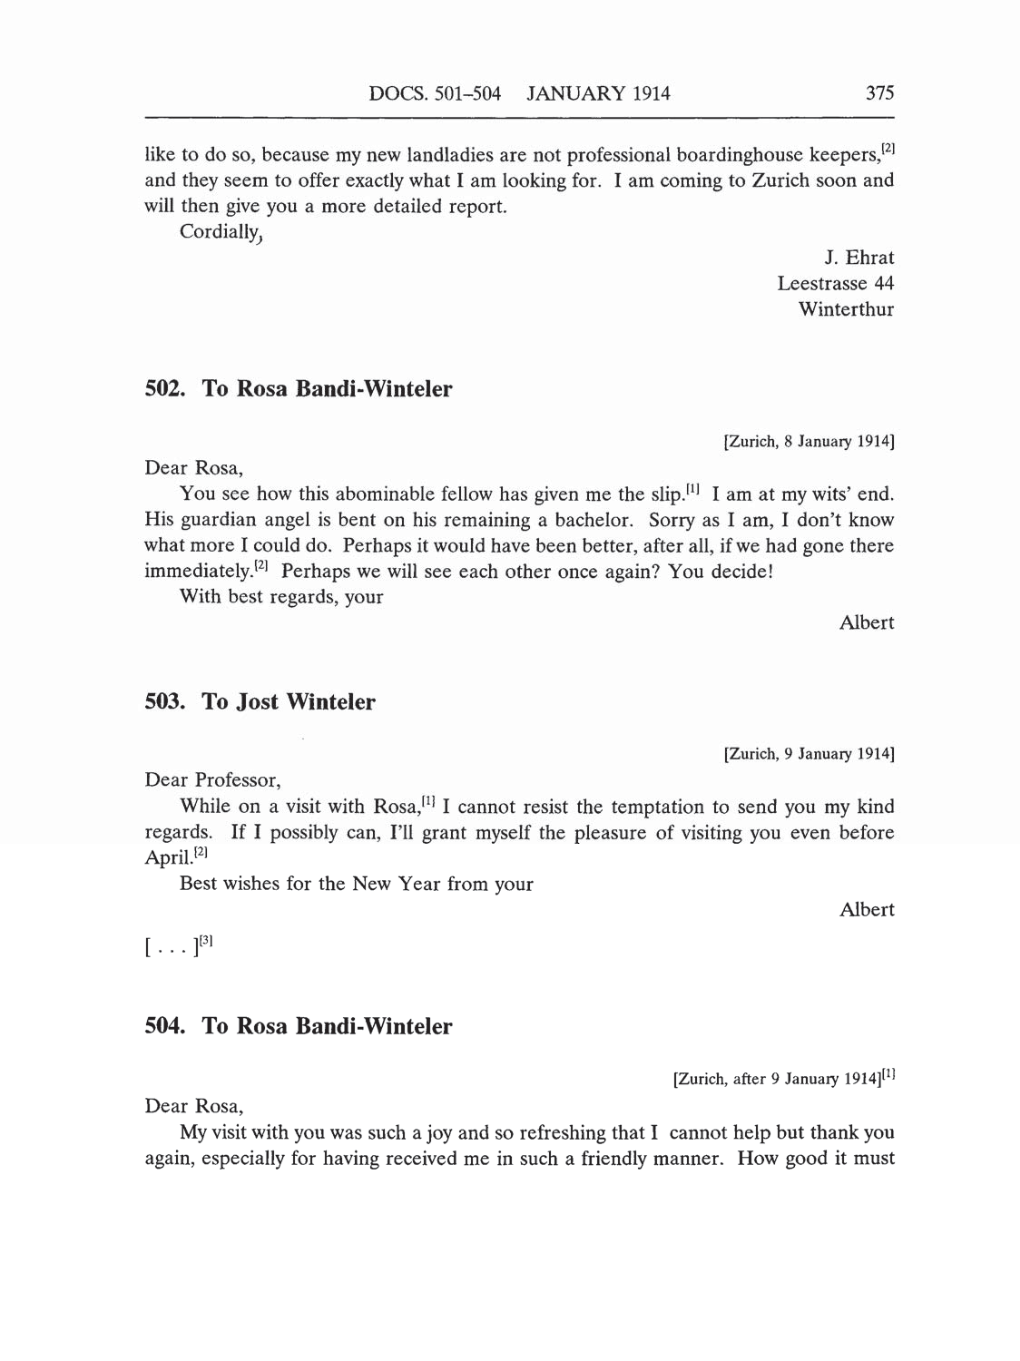 Volume 5: The Swiss Years: Correspondence, 1902-1914 (English translation supplement) page 375